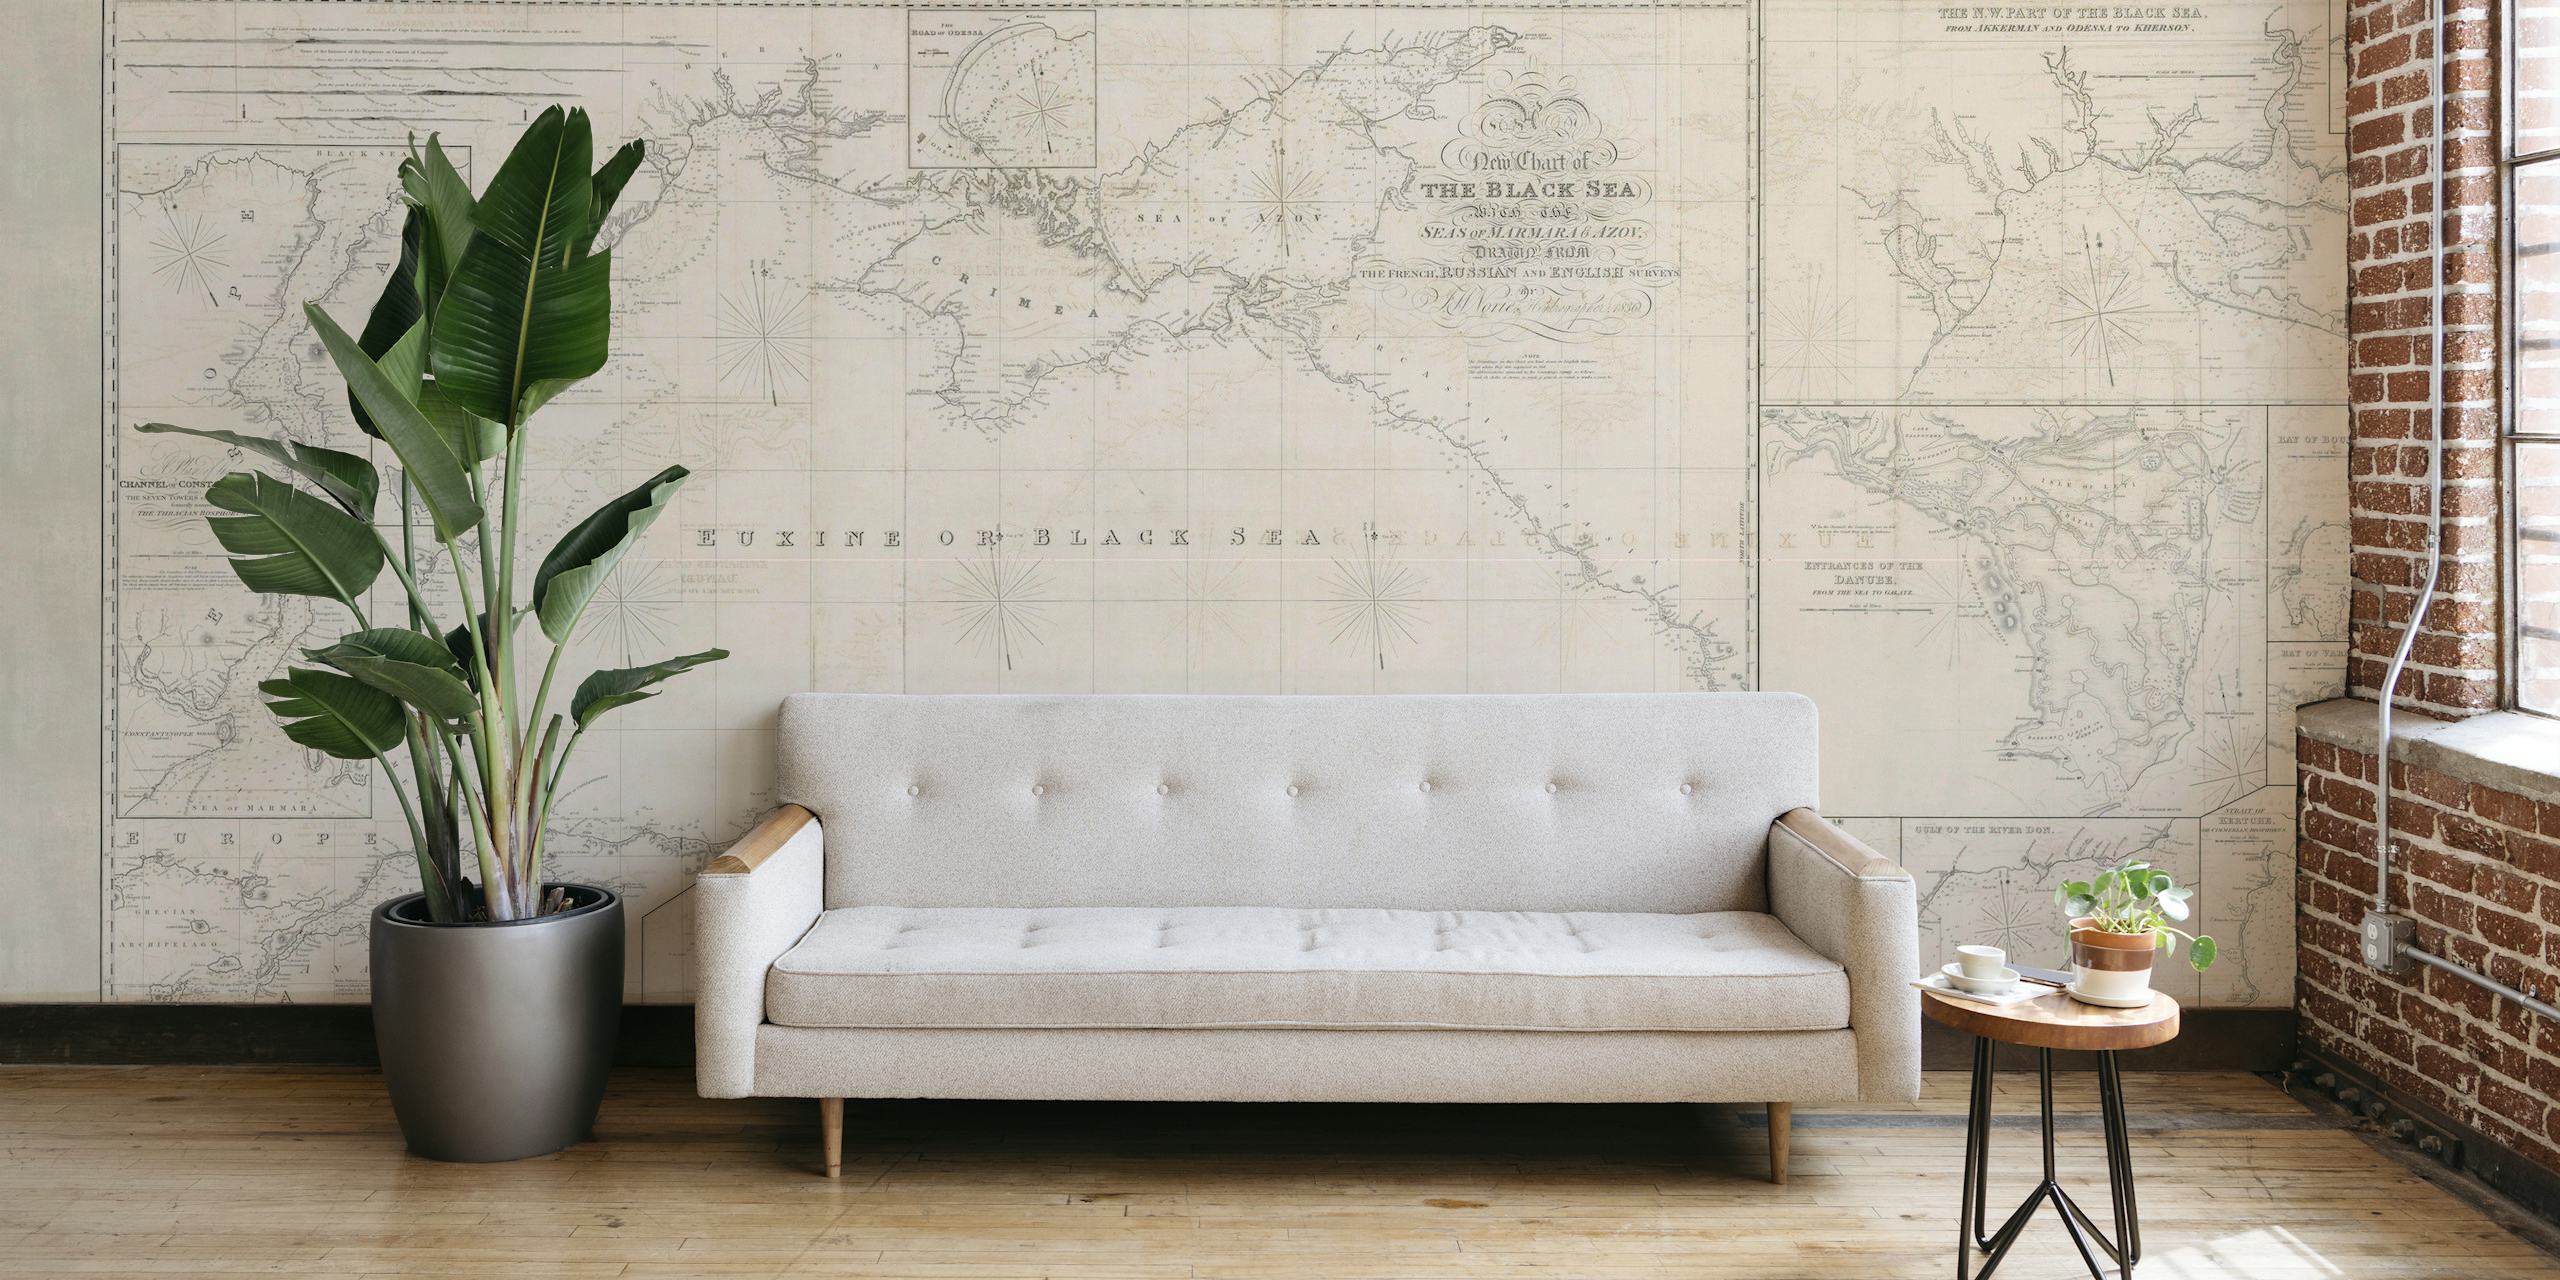 Vintage cartographic wall mural of the Black Sea with intricate geographical details